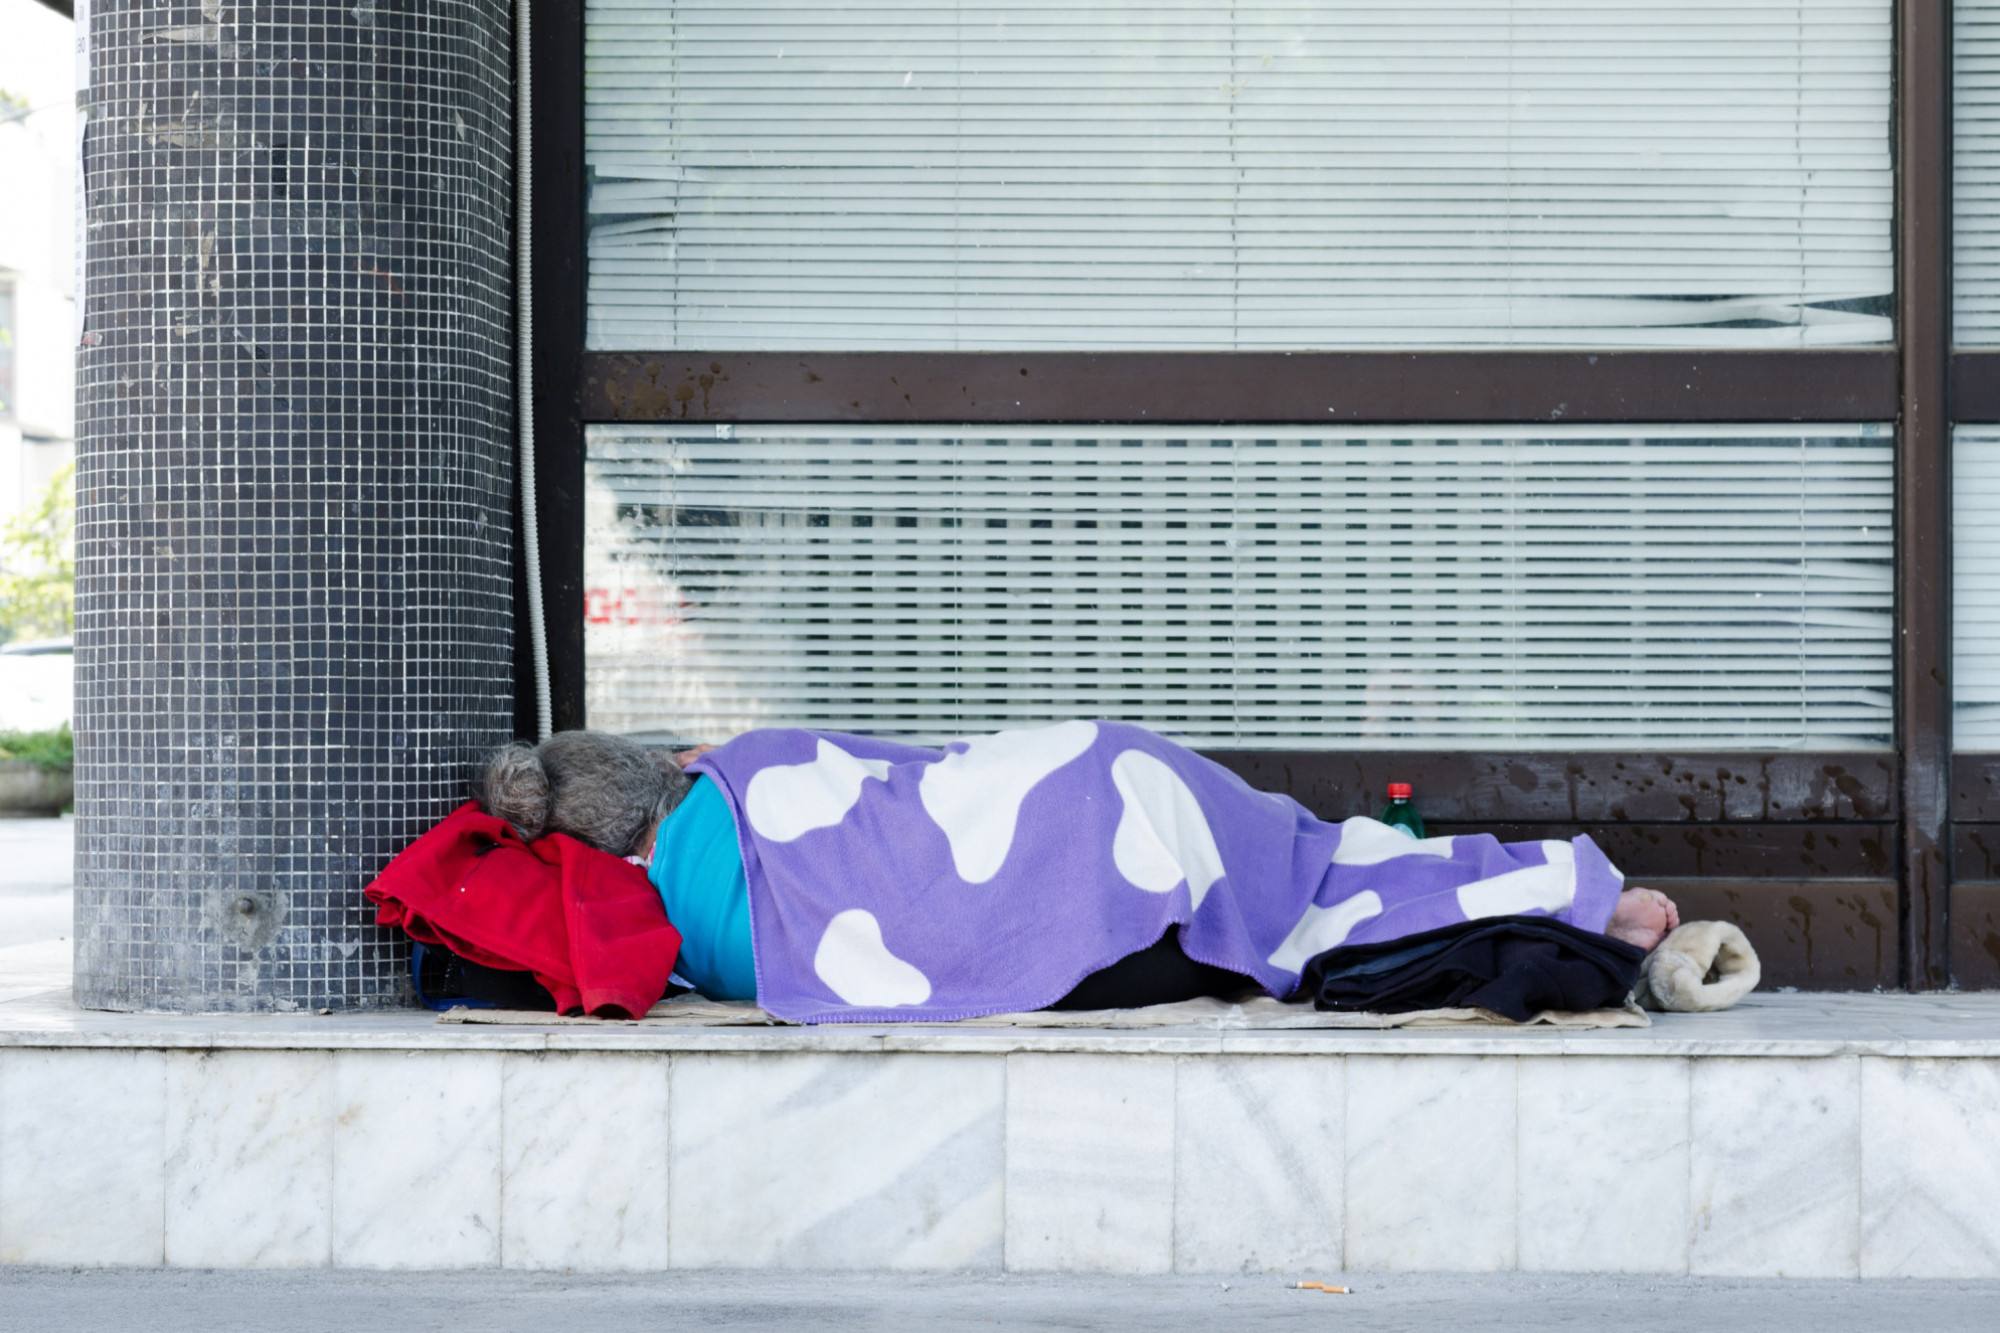 Homelessness - It impacts upon all of us - feature photo